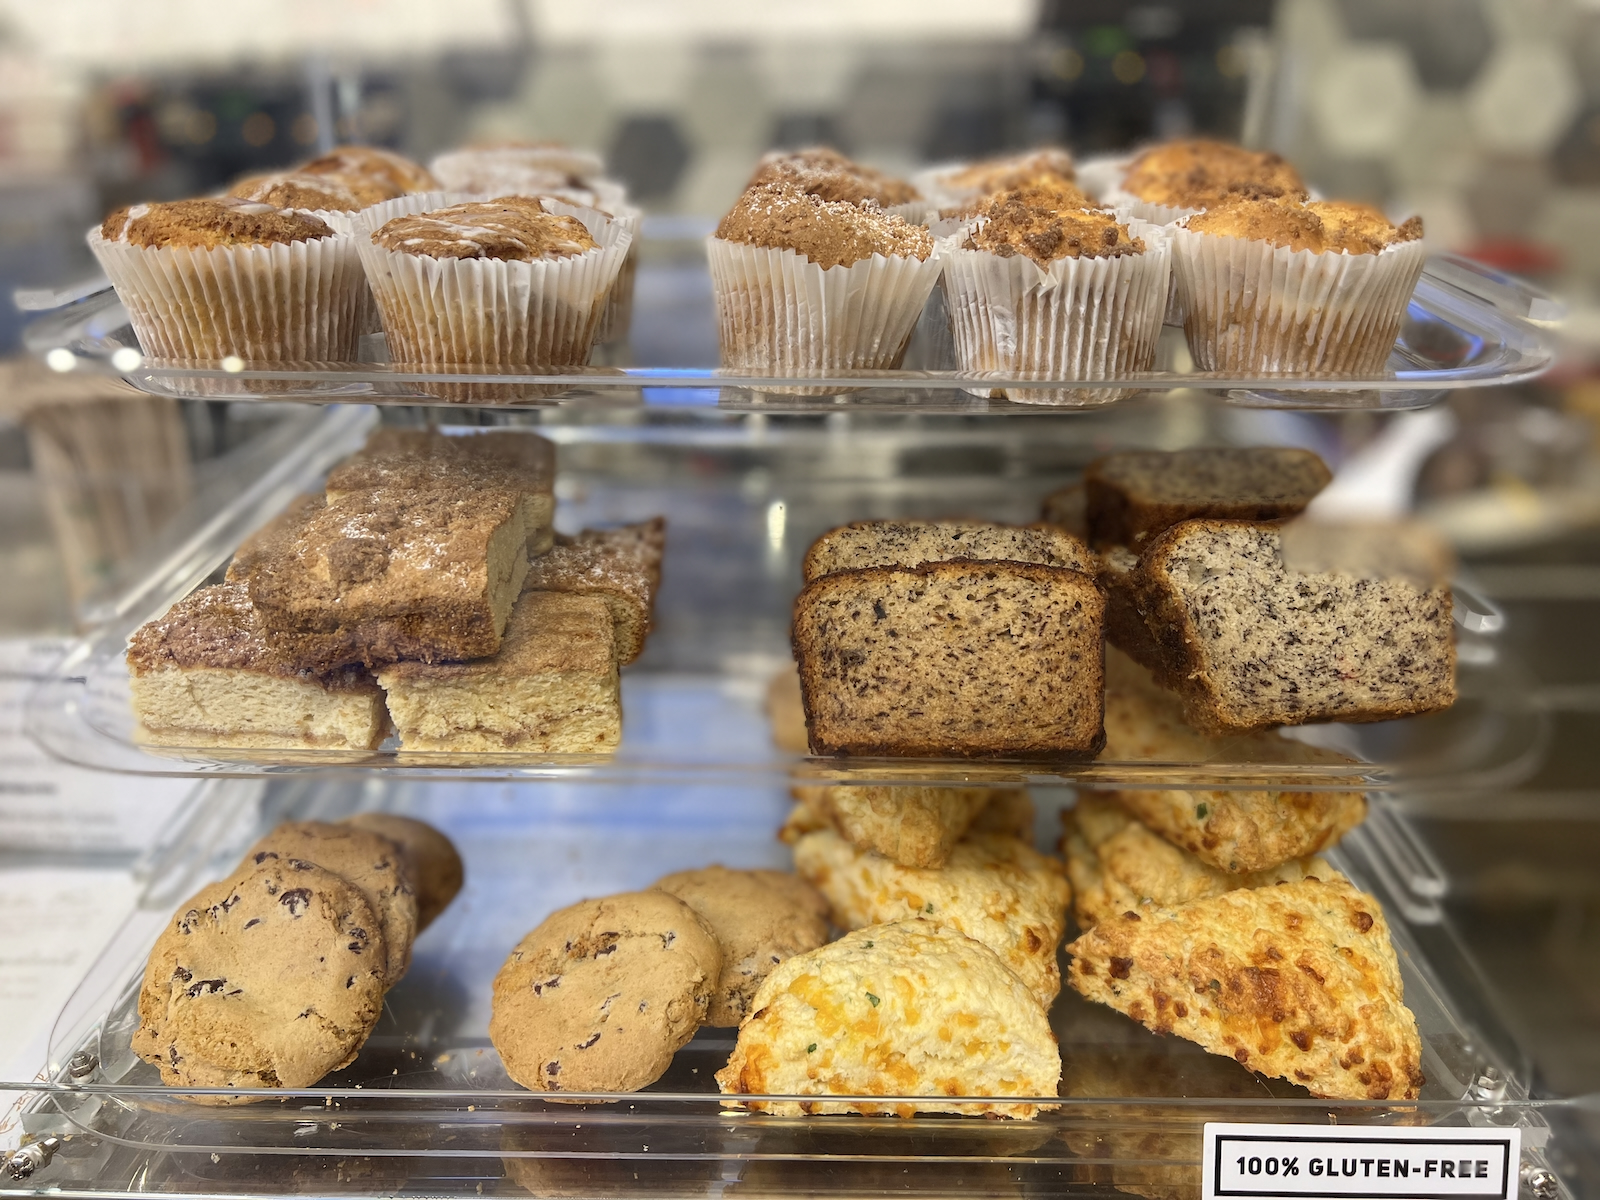 Baked goods at Inspired Coffee